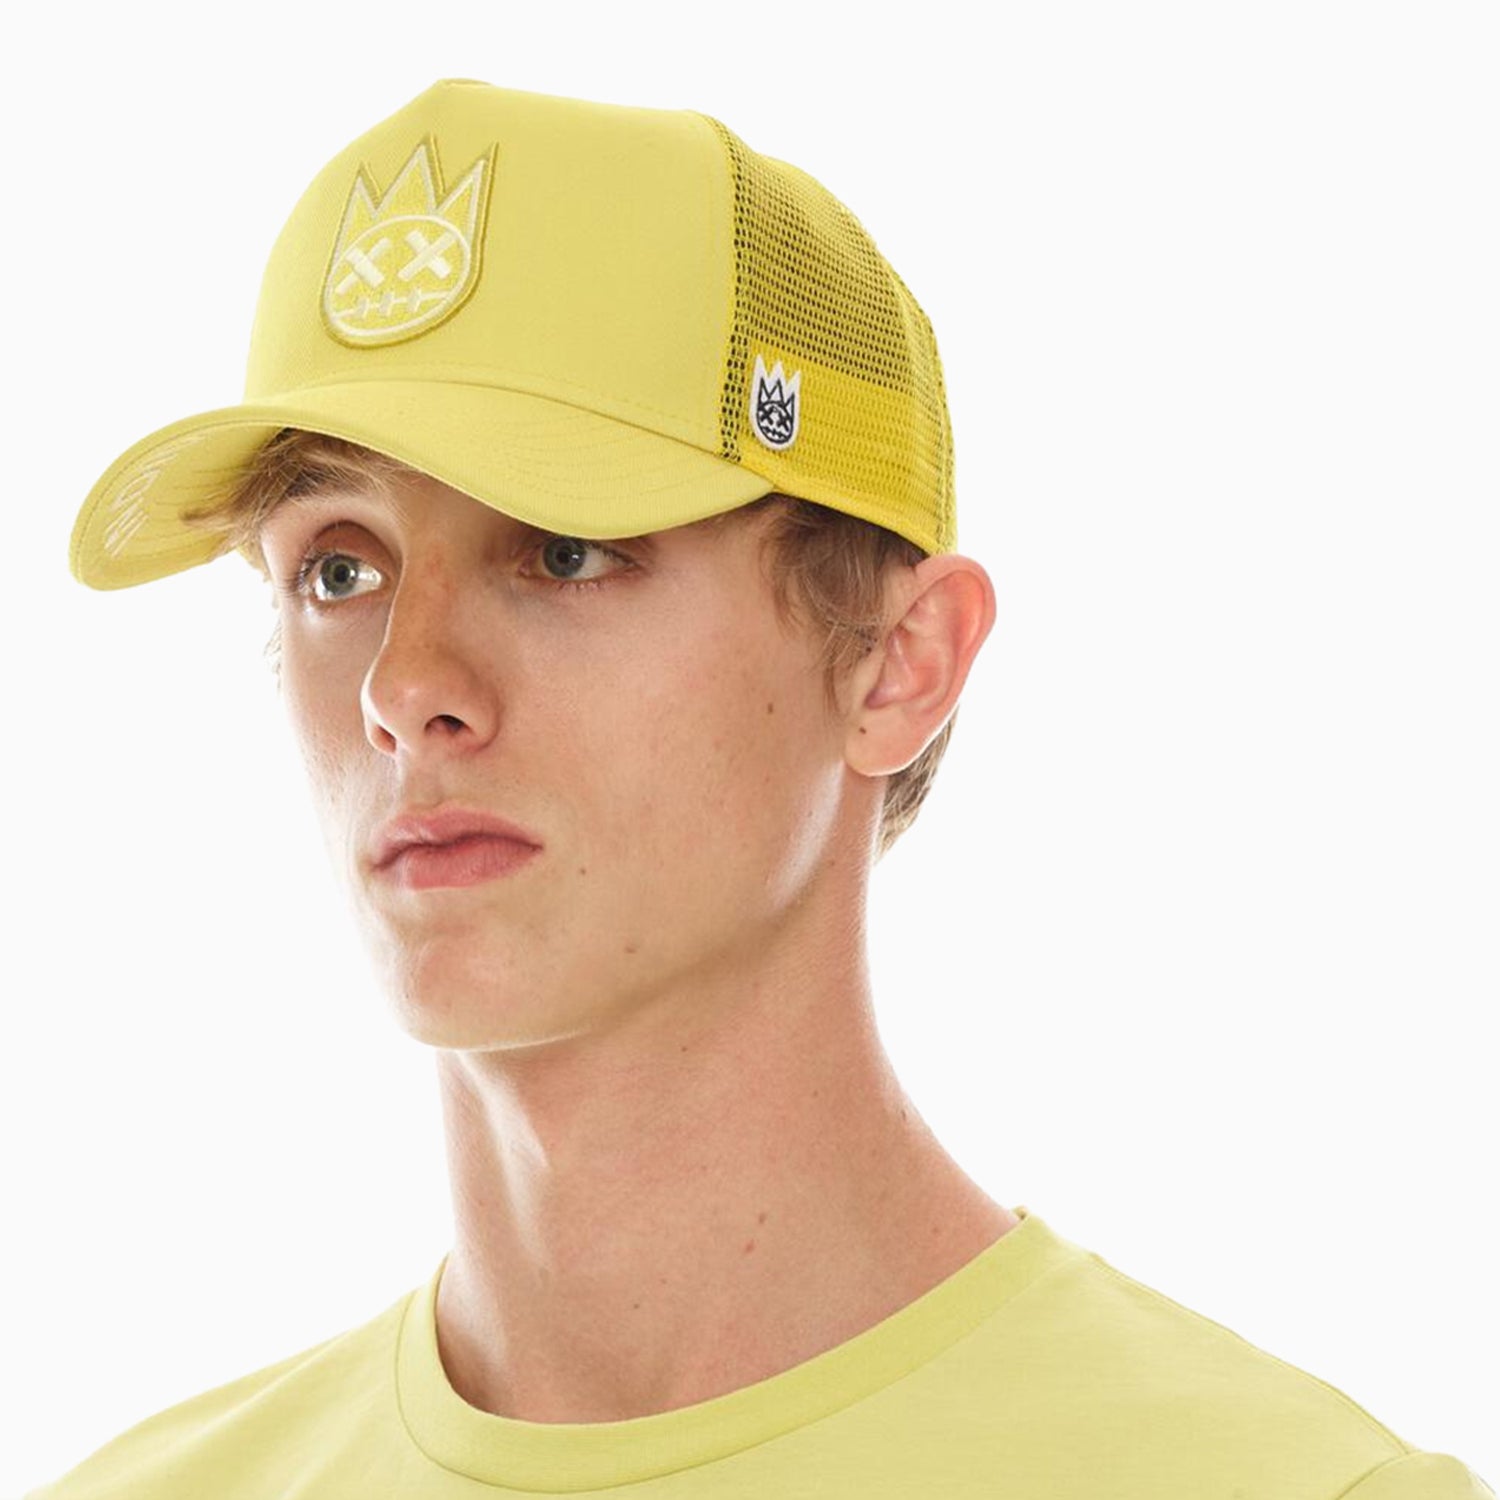 cult-of-individuality-mens-clean-logo-trucker-curved-visor-hat-623b9-ch69a